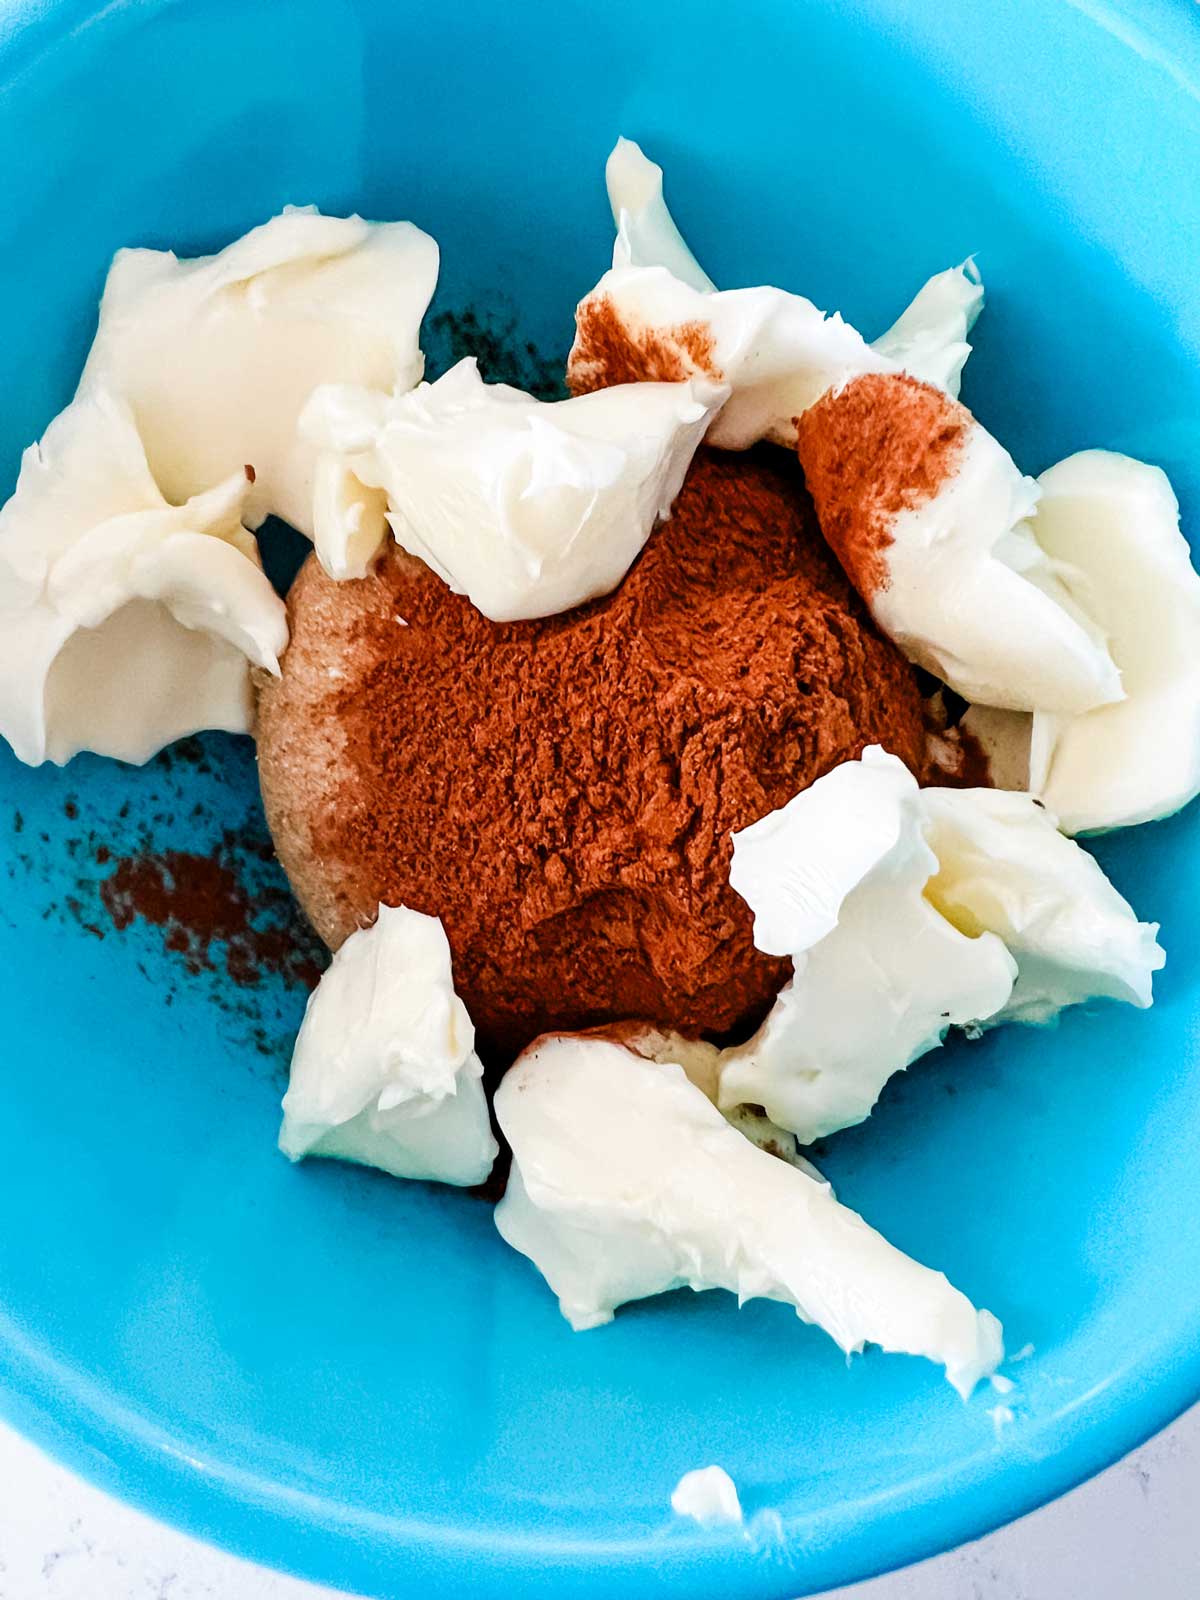 Filling ingredients for cinnamon rolls in a blue bowl.